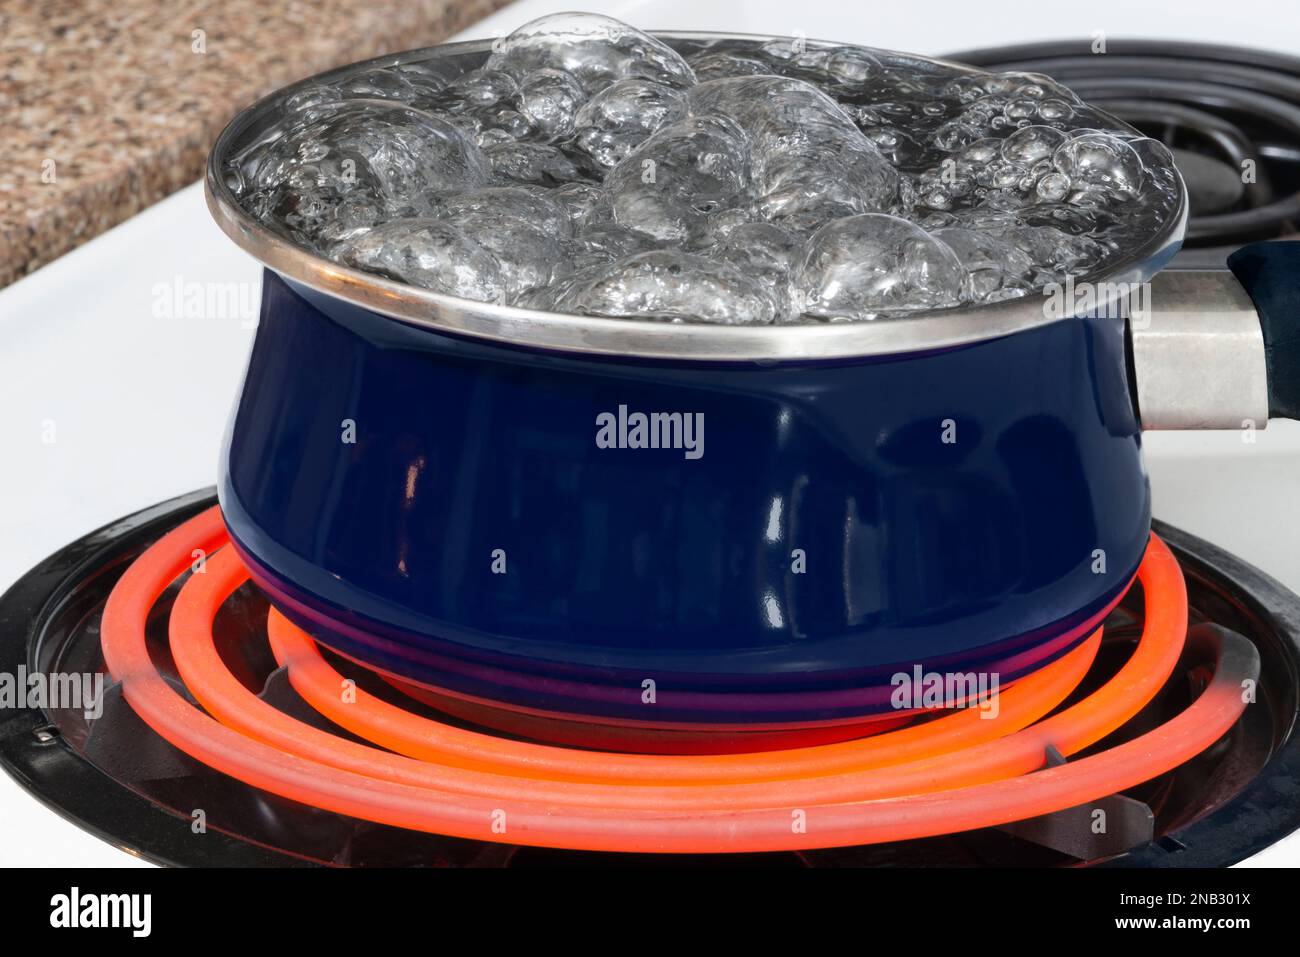 Horizontal shot of a blue pot on a stove top on a red hot burner holding boiling water. Stock Photo